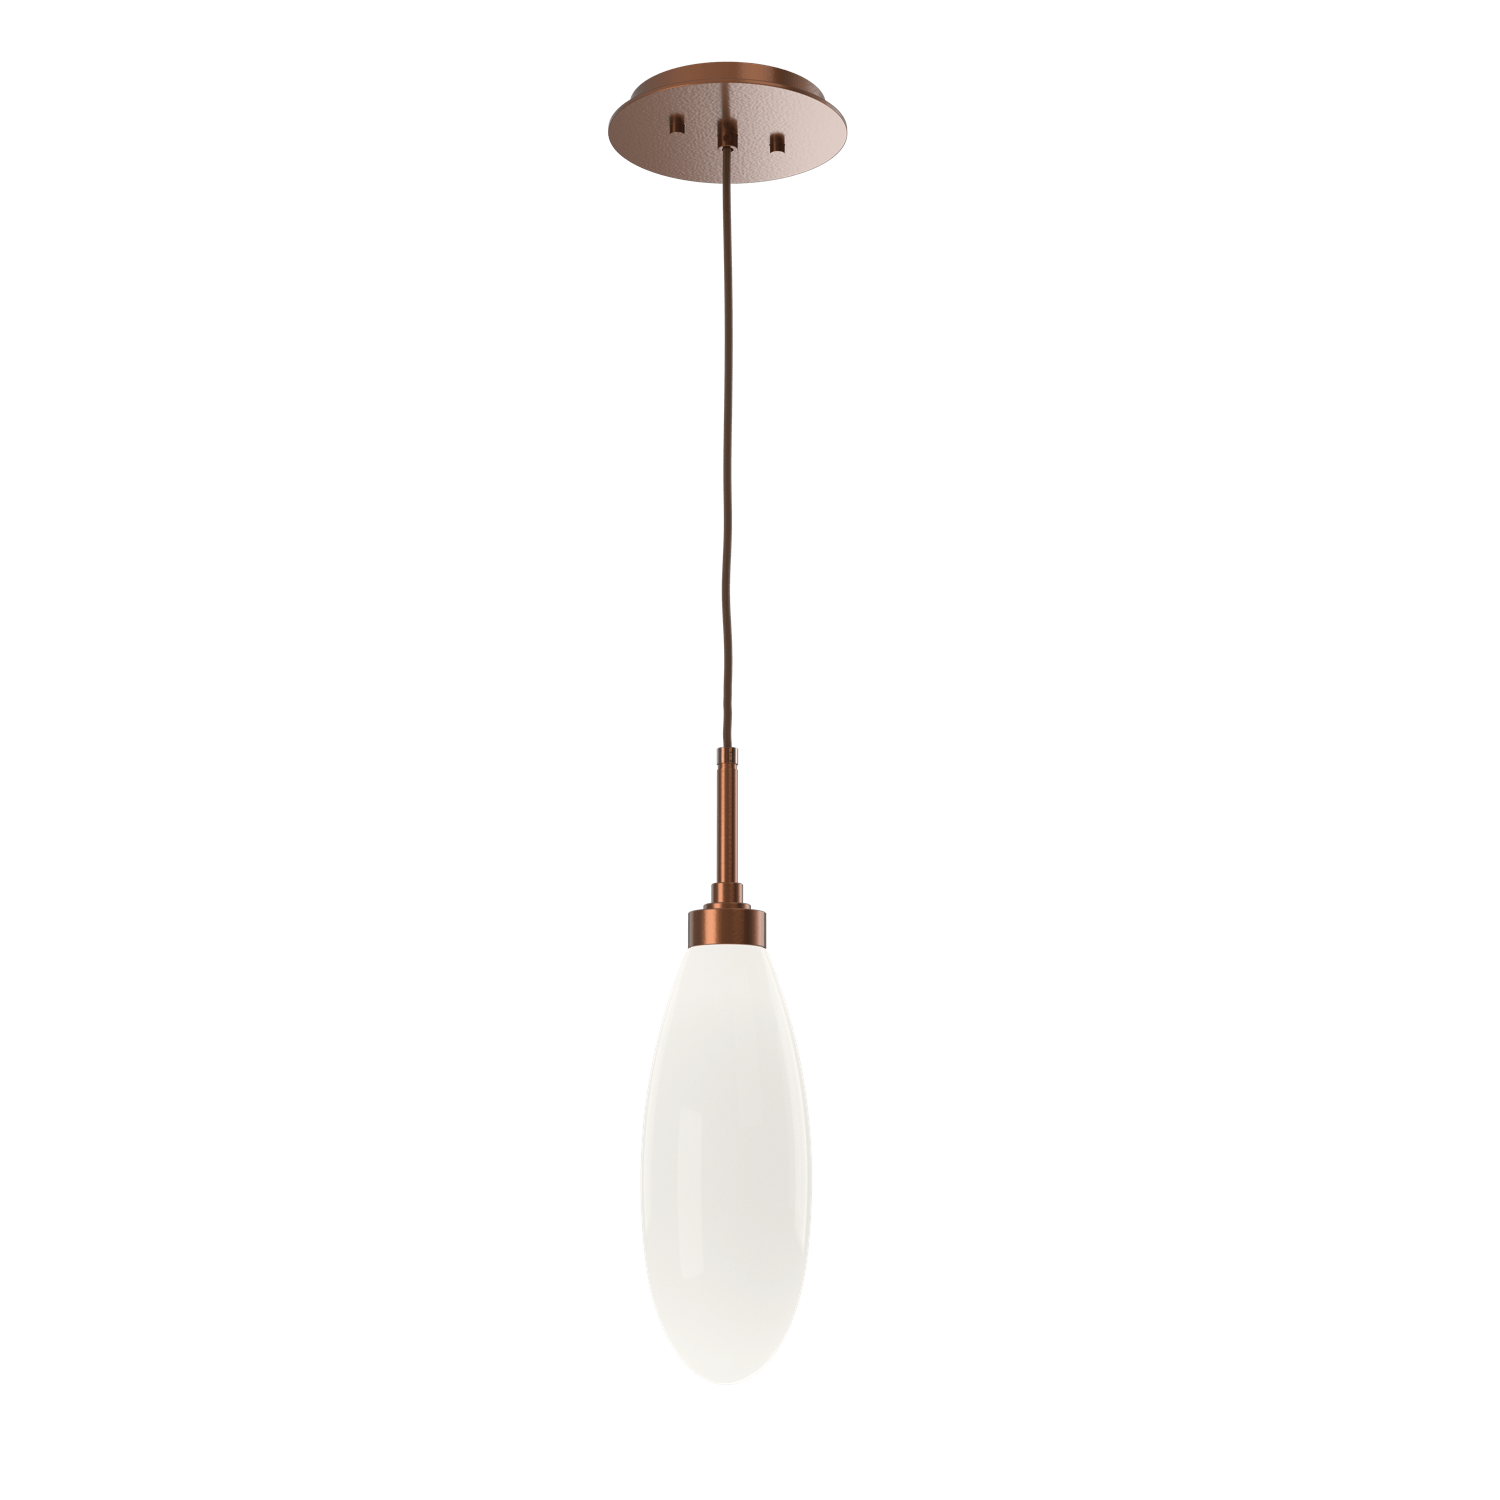 LAB0071-15-BB-WL-LL-Hammerton-Studio-Fiori-pendant-light-with-burnished-bronze-finish-and-opal-white-glass-shades-and-LED-lamping